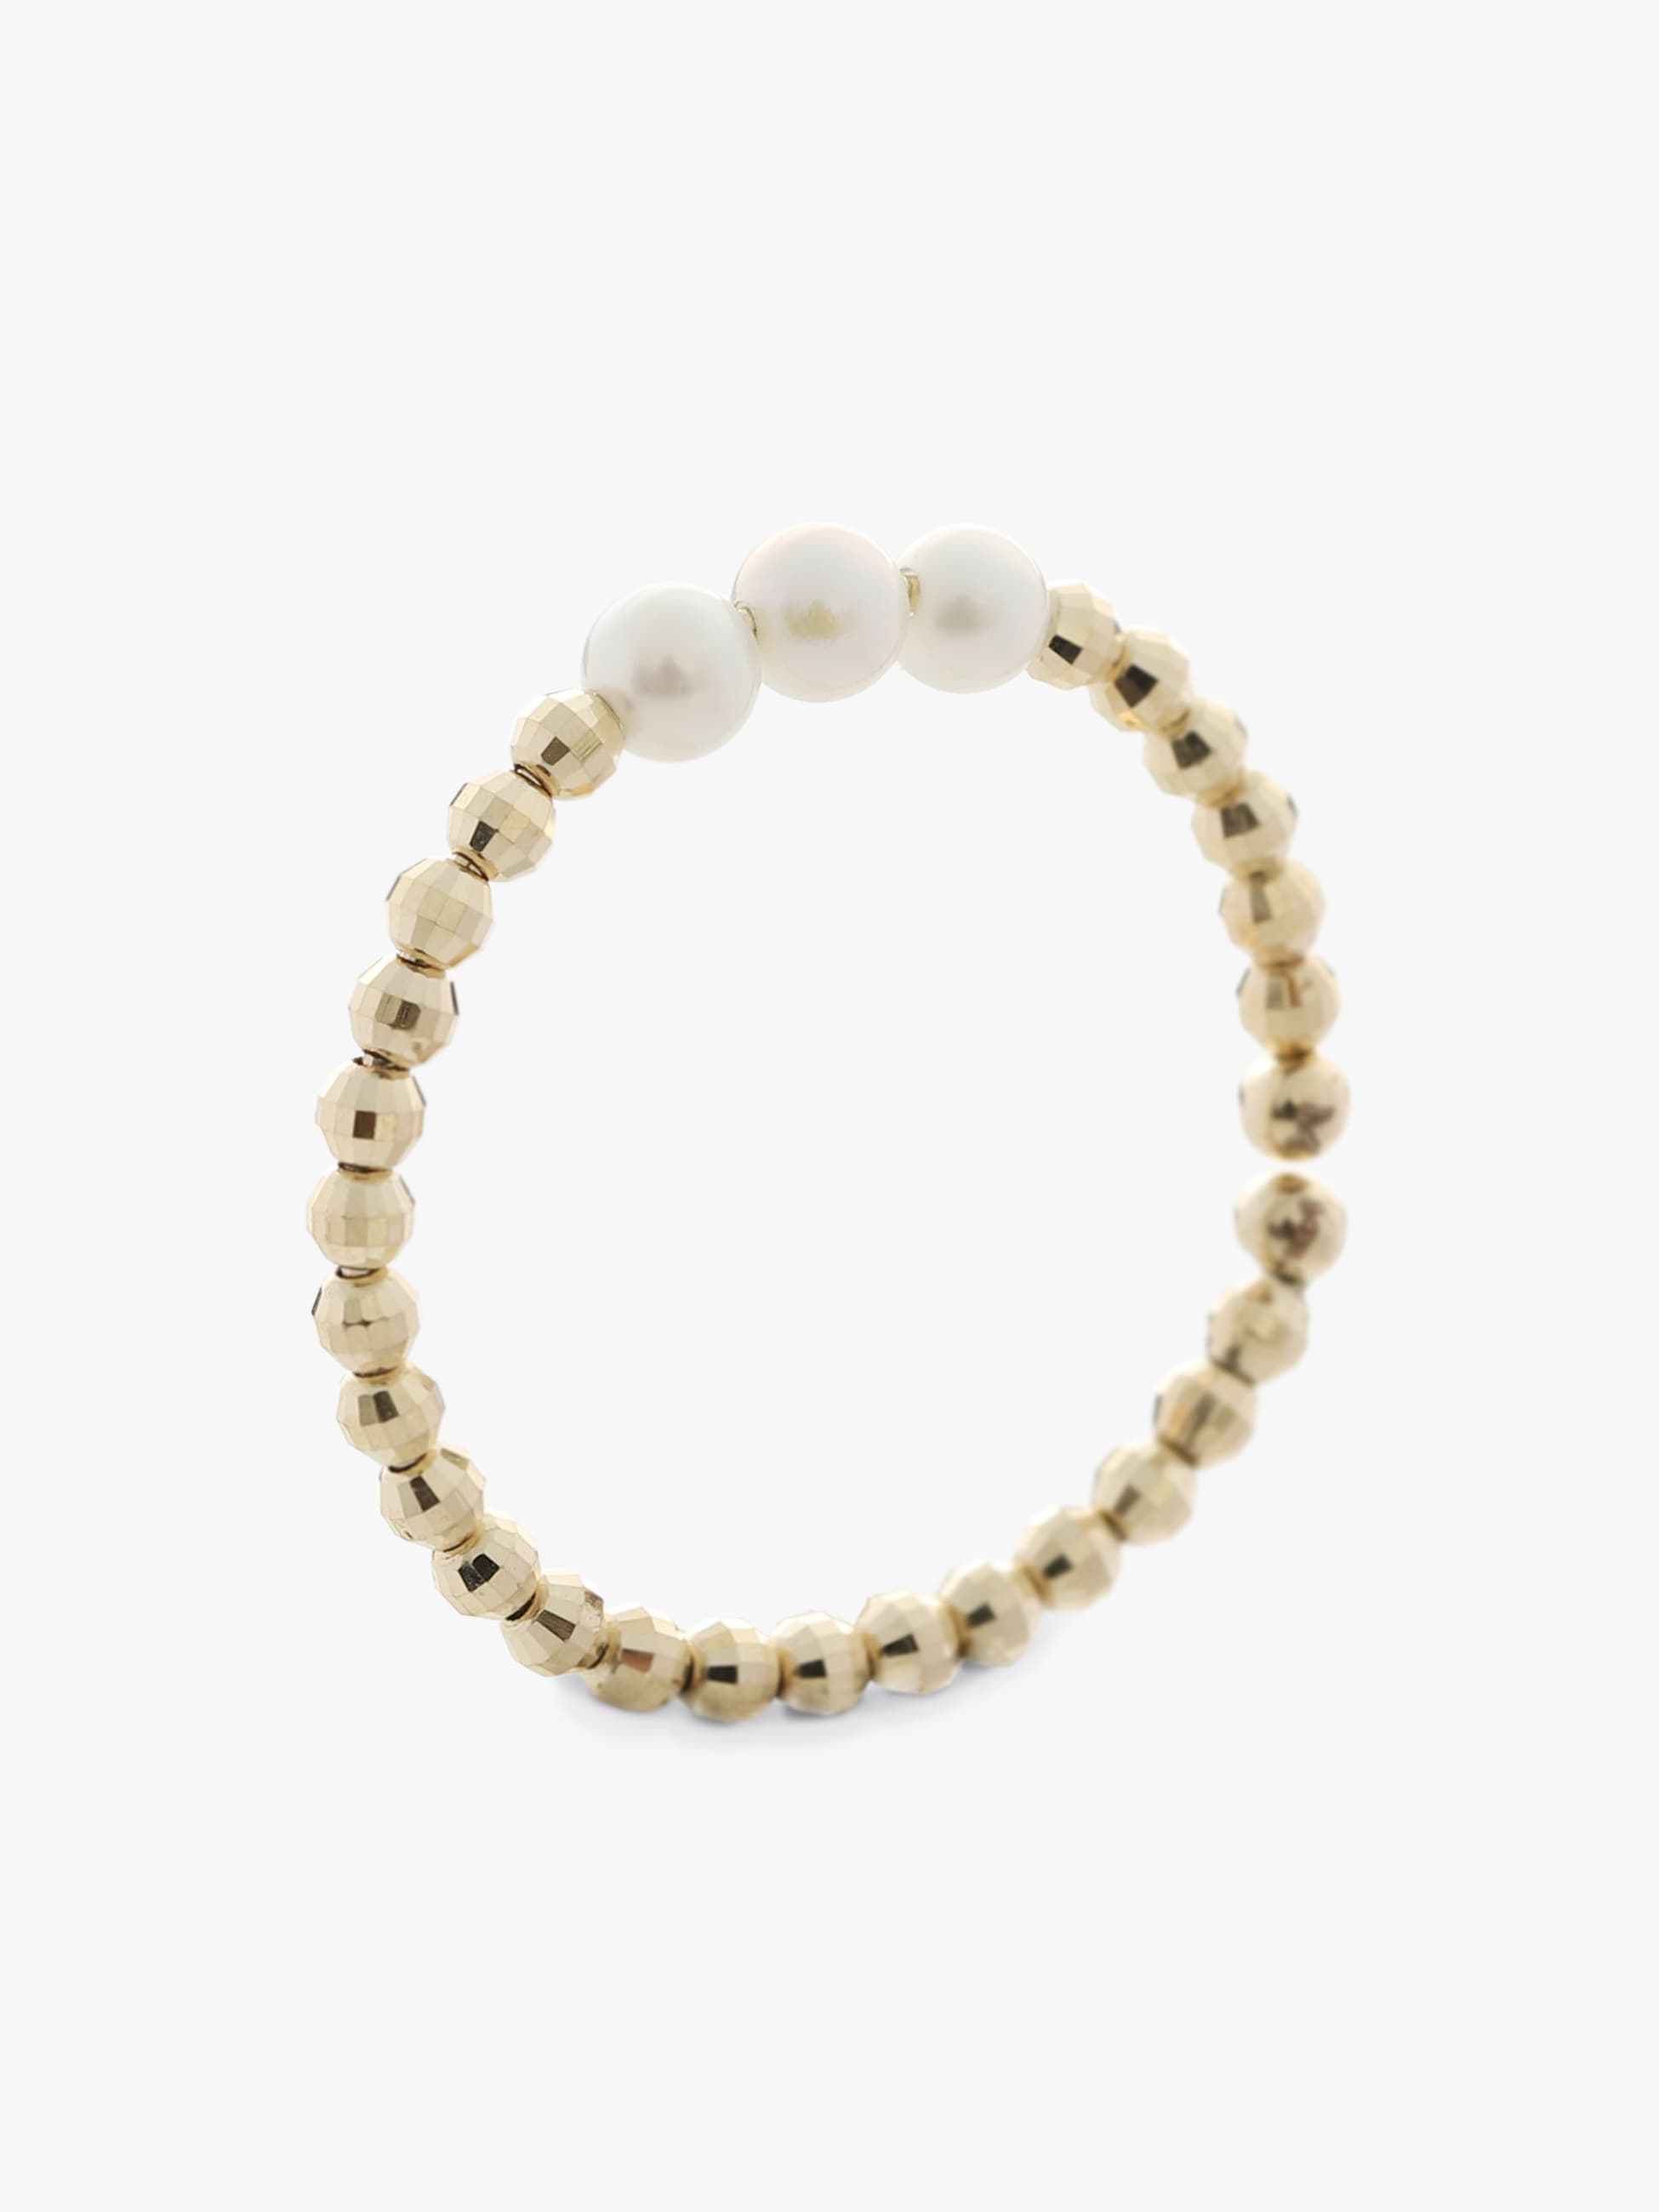 14K Gold Beads and Pearl Single Hoop Ear Cuff